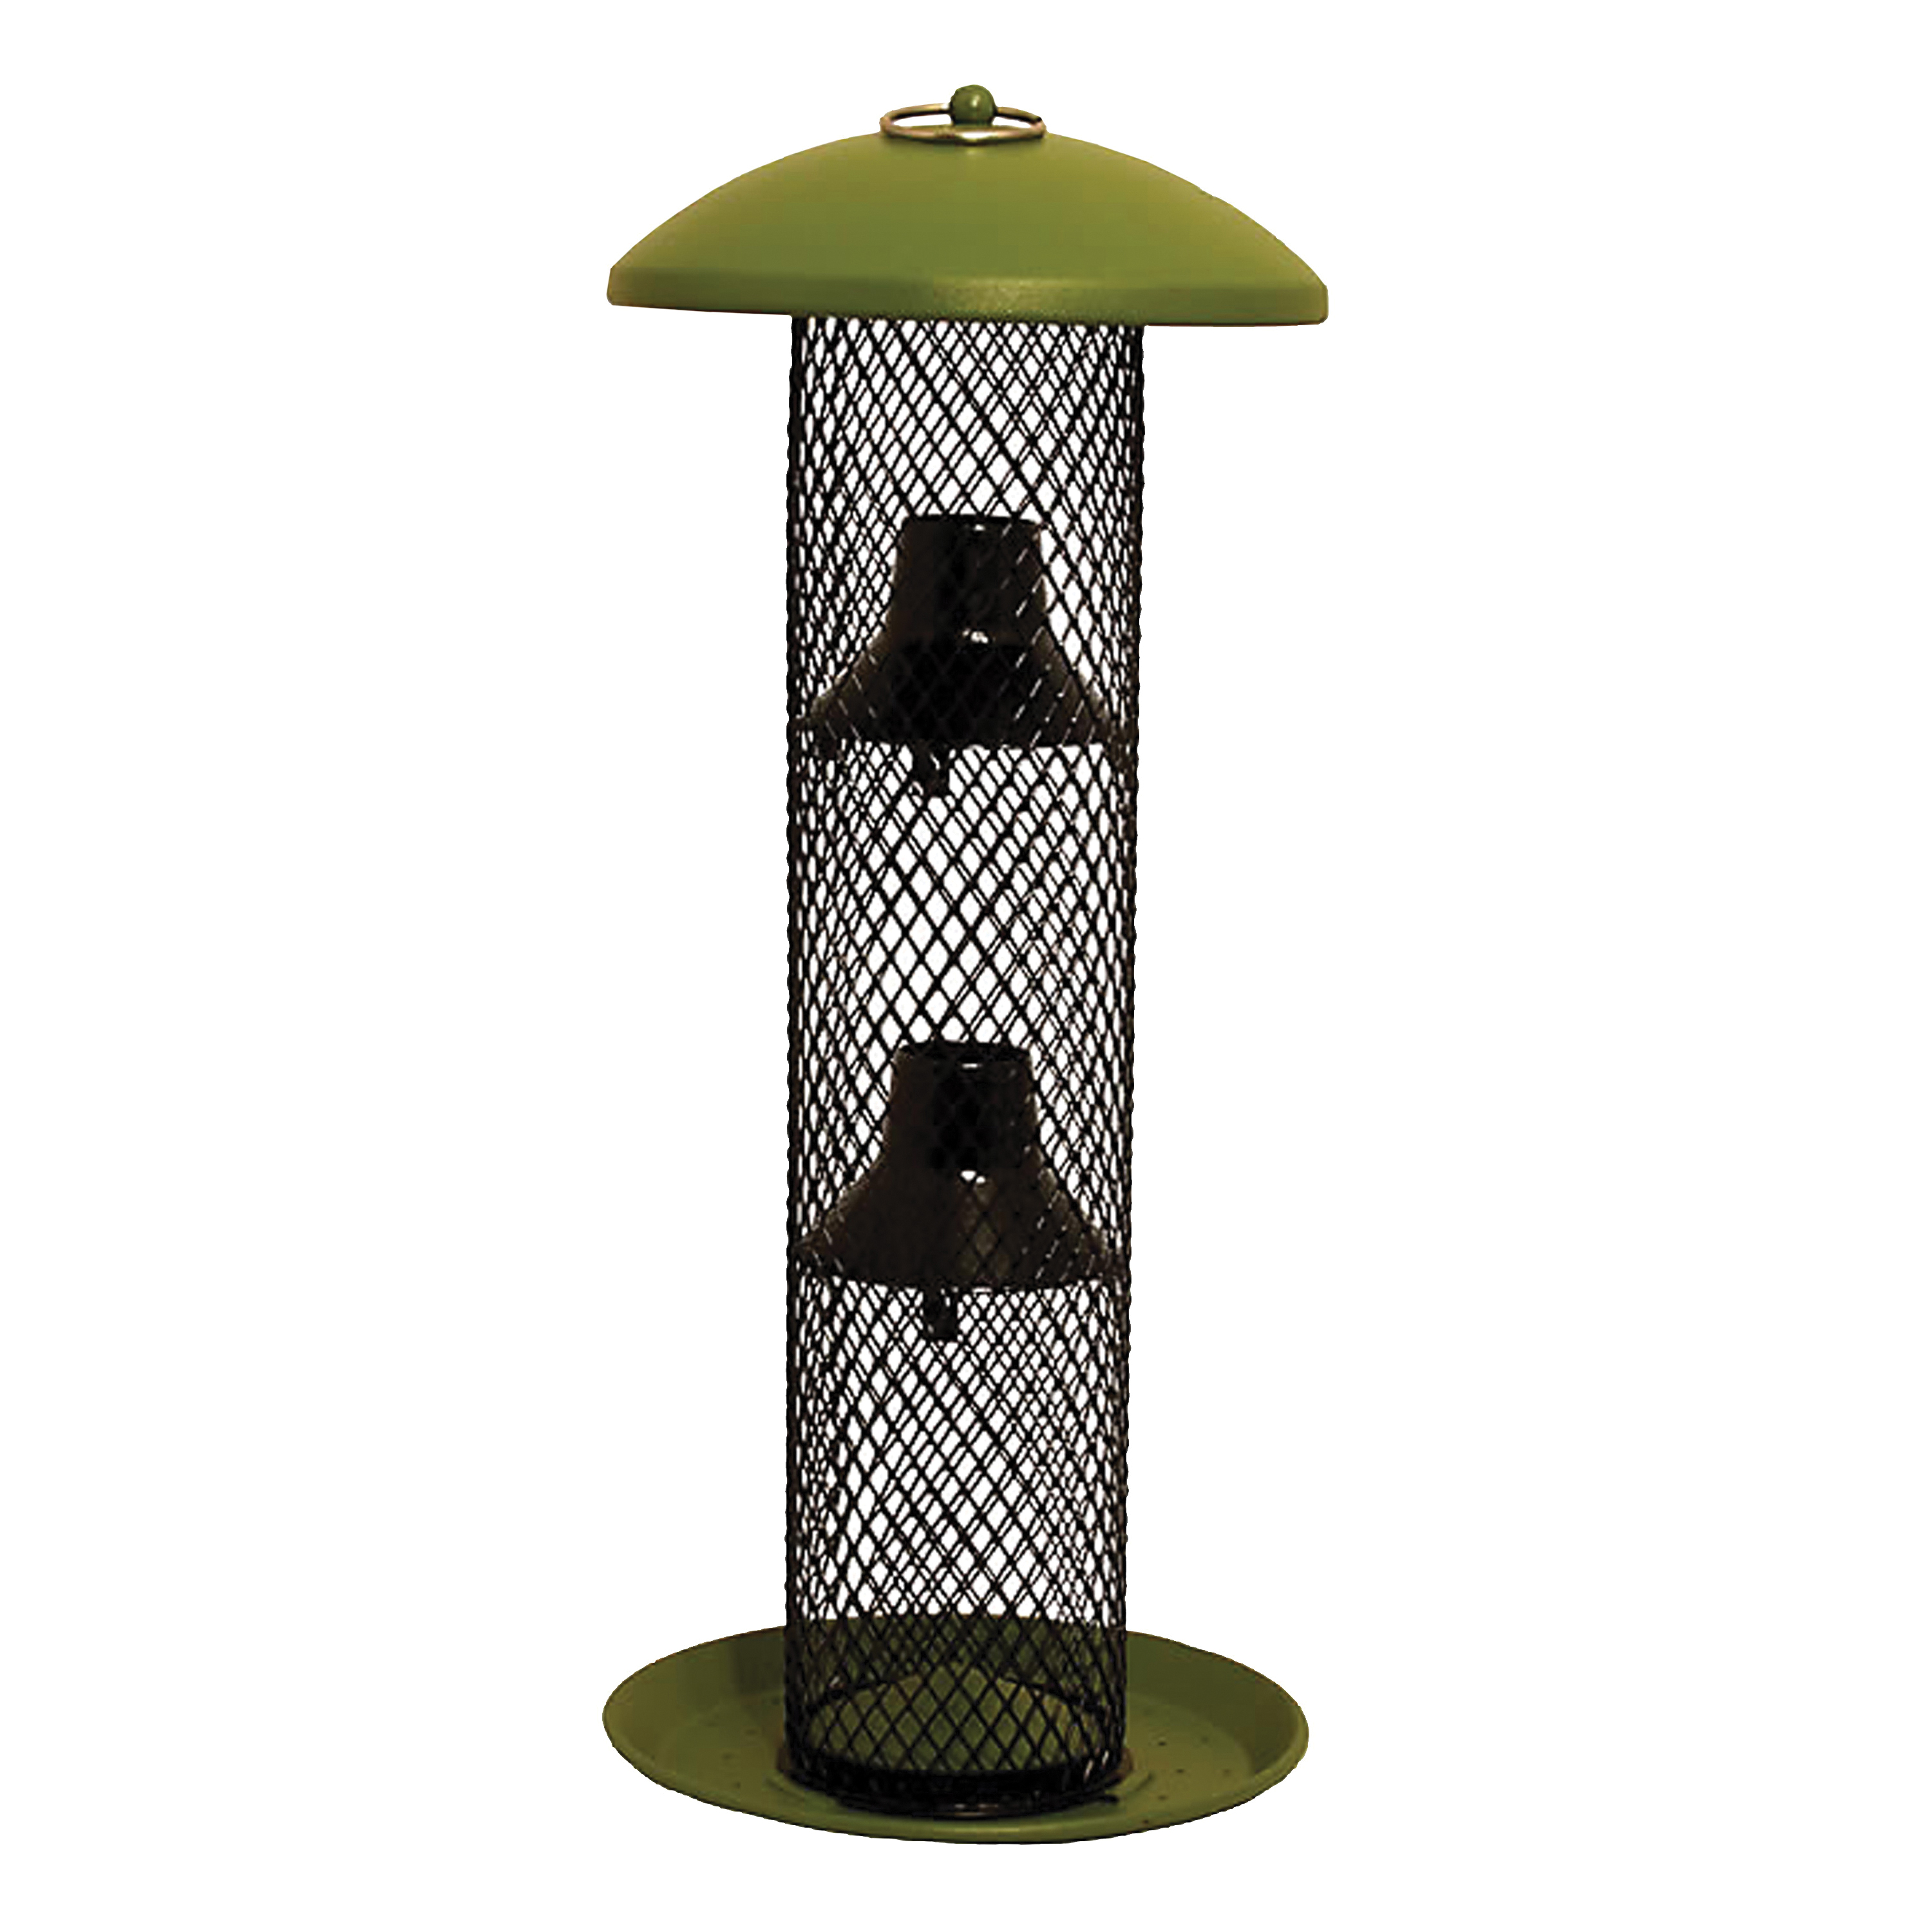 NO/NO GSS00347 Wild Bird Feeder, 16-1/2 in H, 1.5 lb, Metal, Green, Powder-Coated, Hanging Mounting